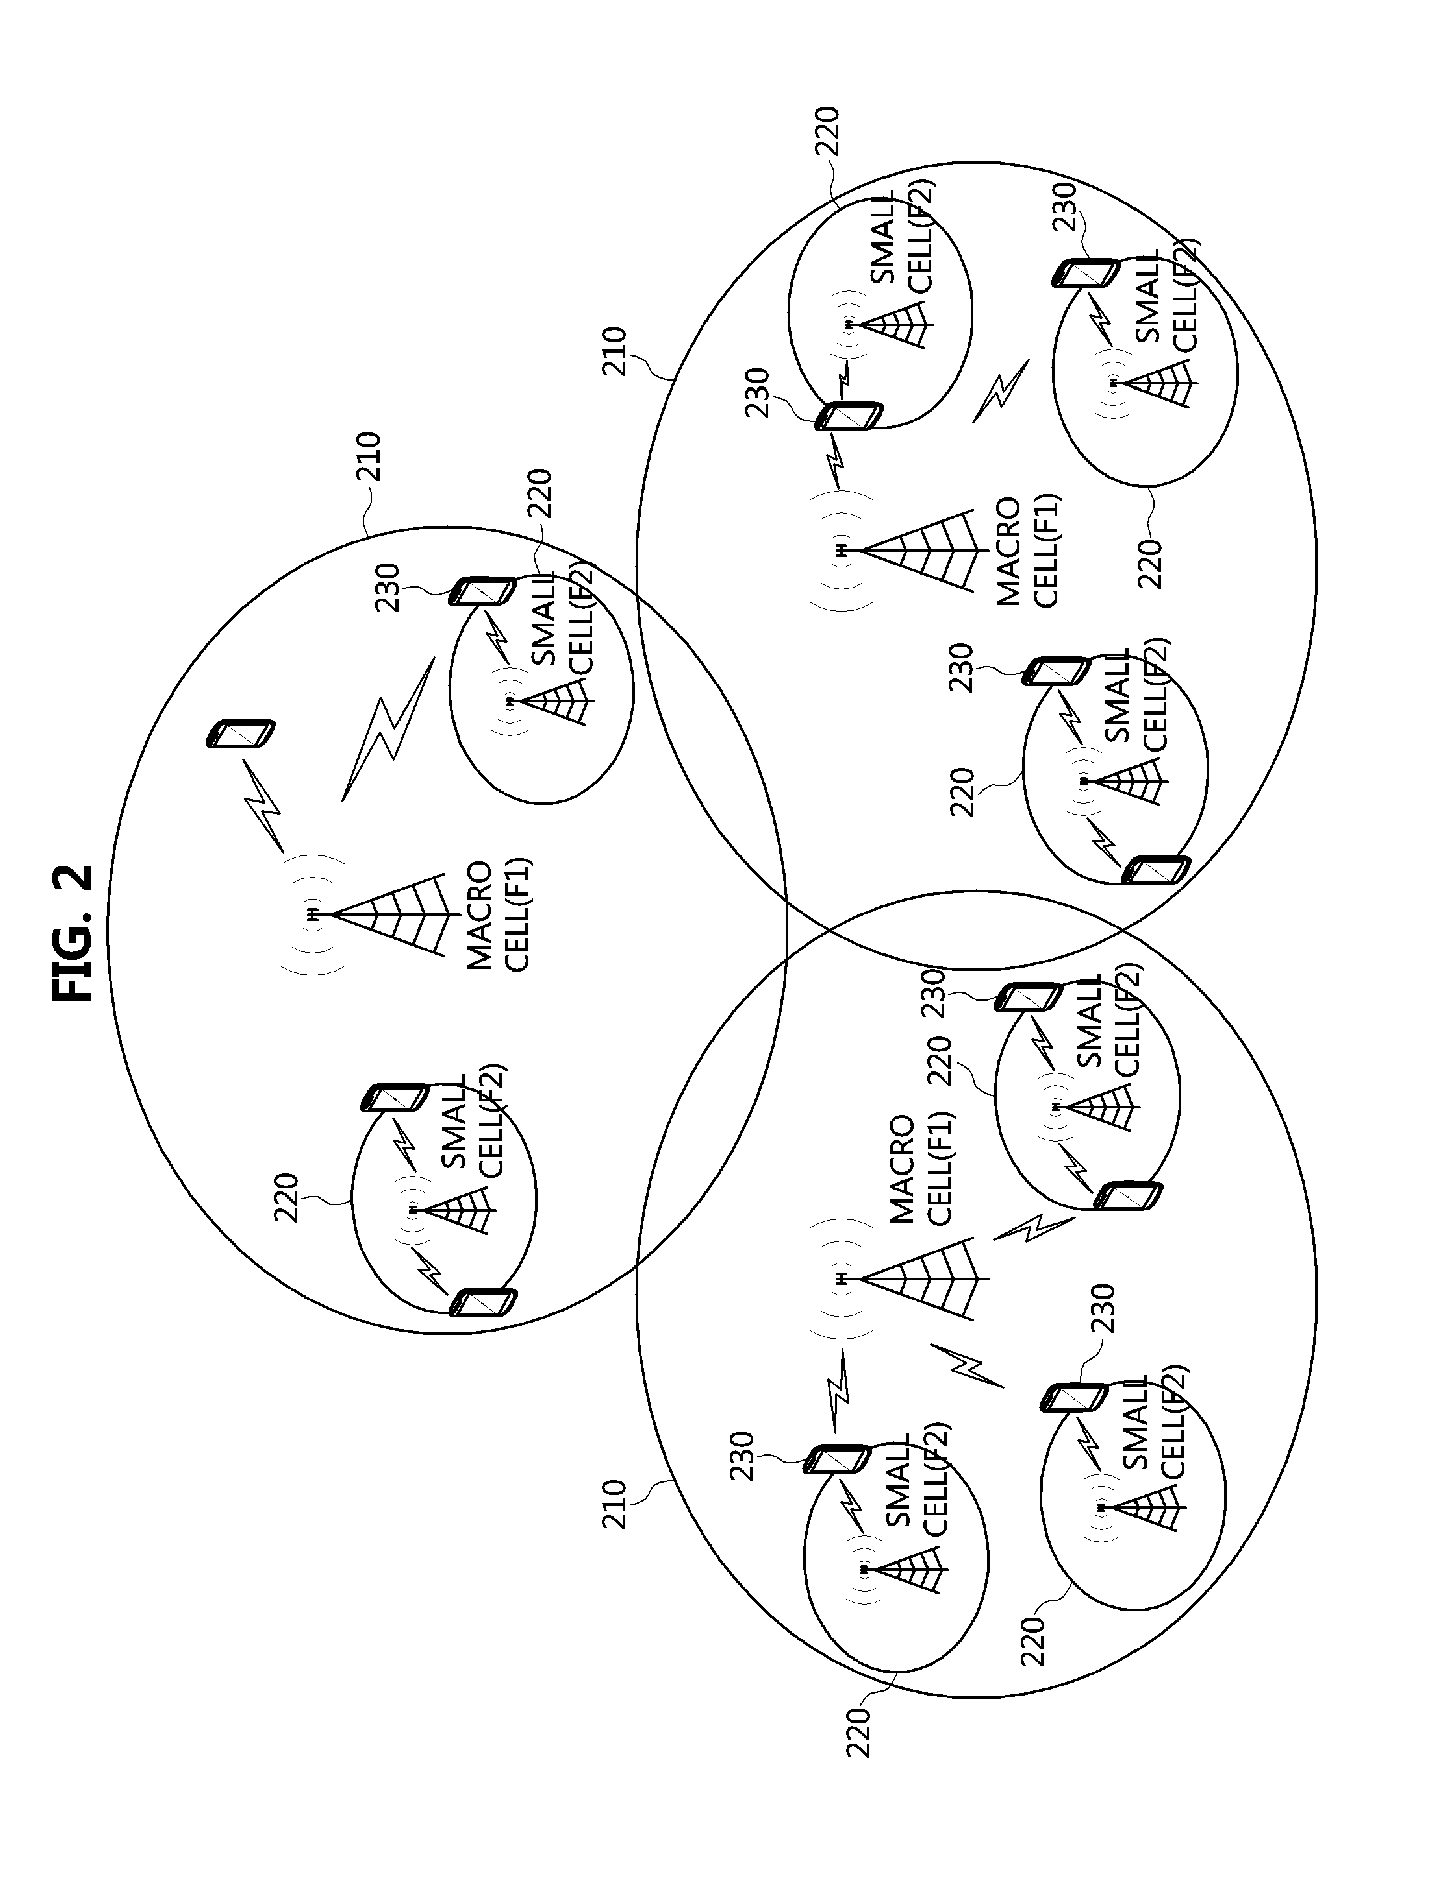 Method for enhancing small cell